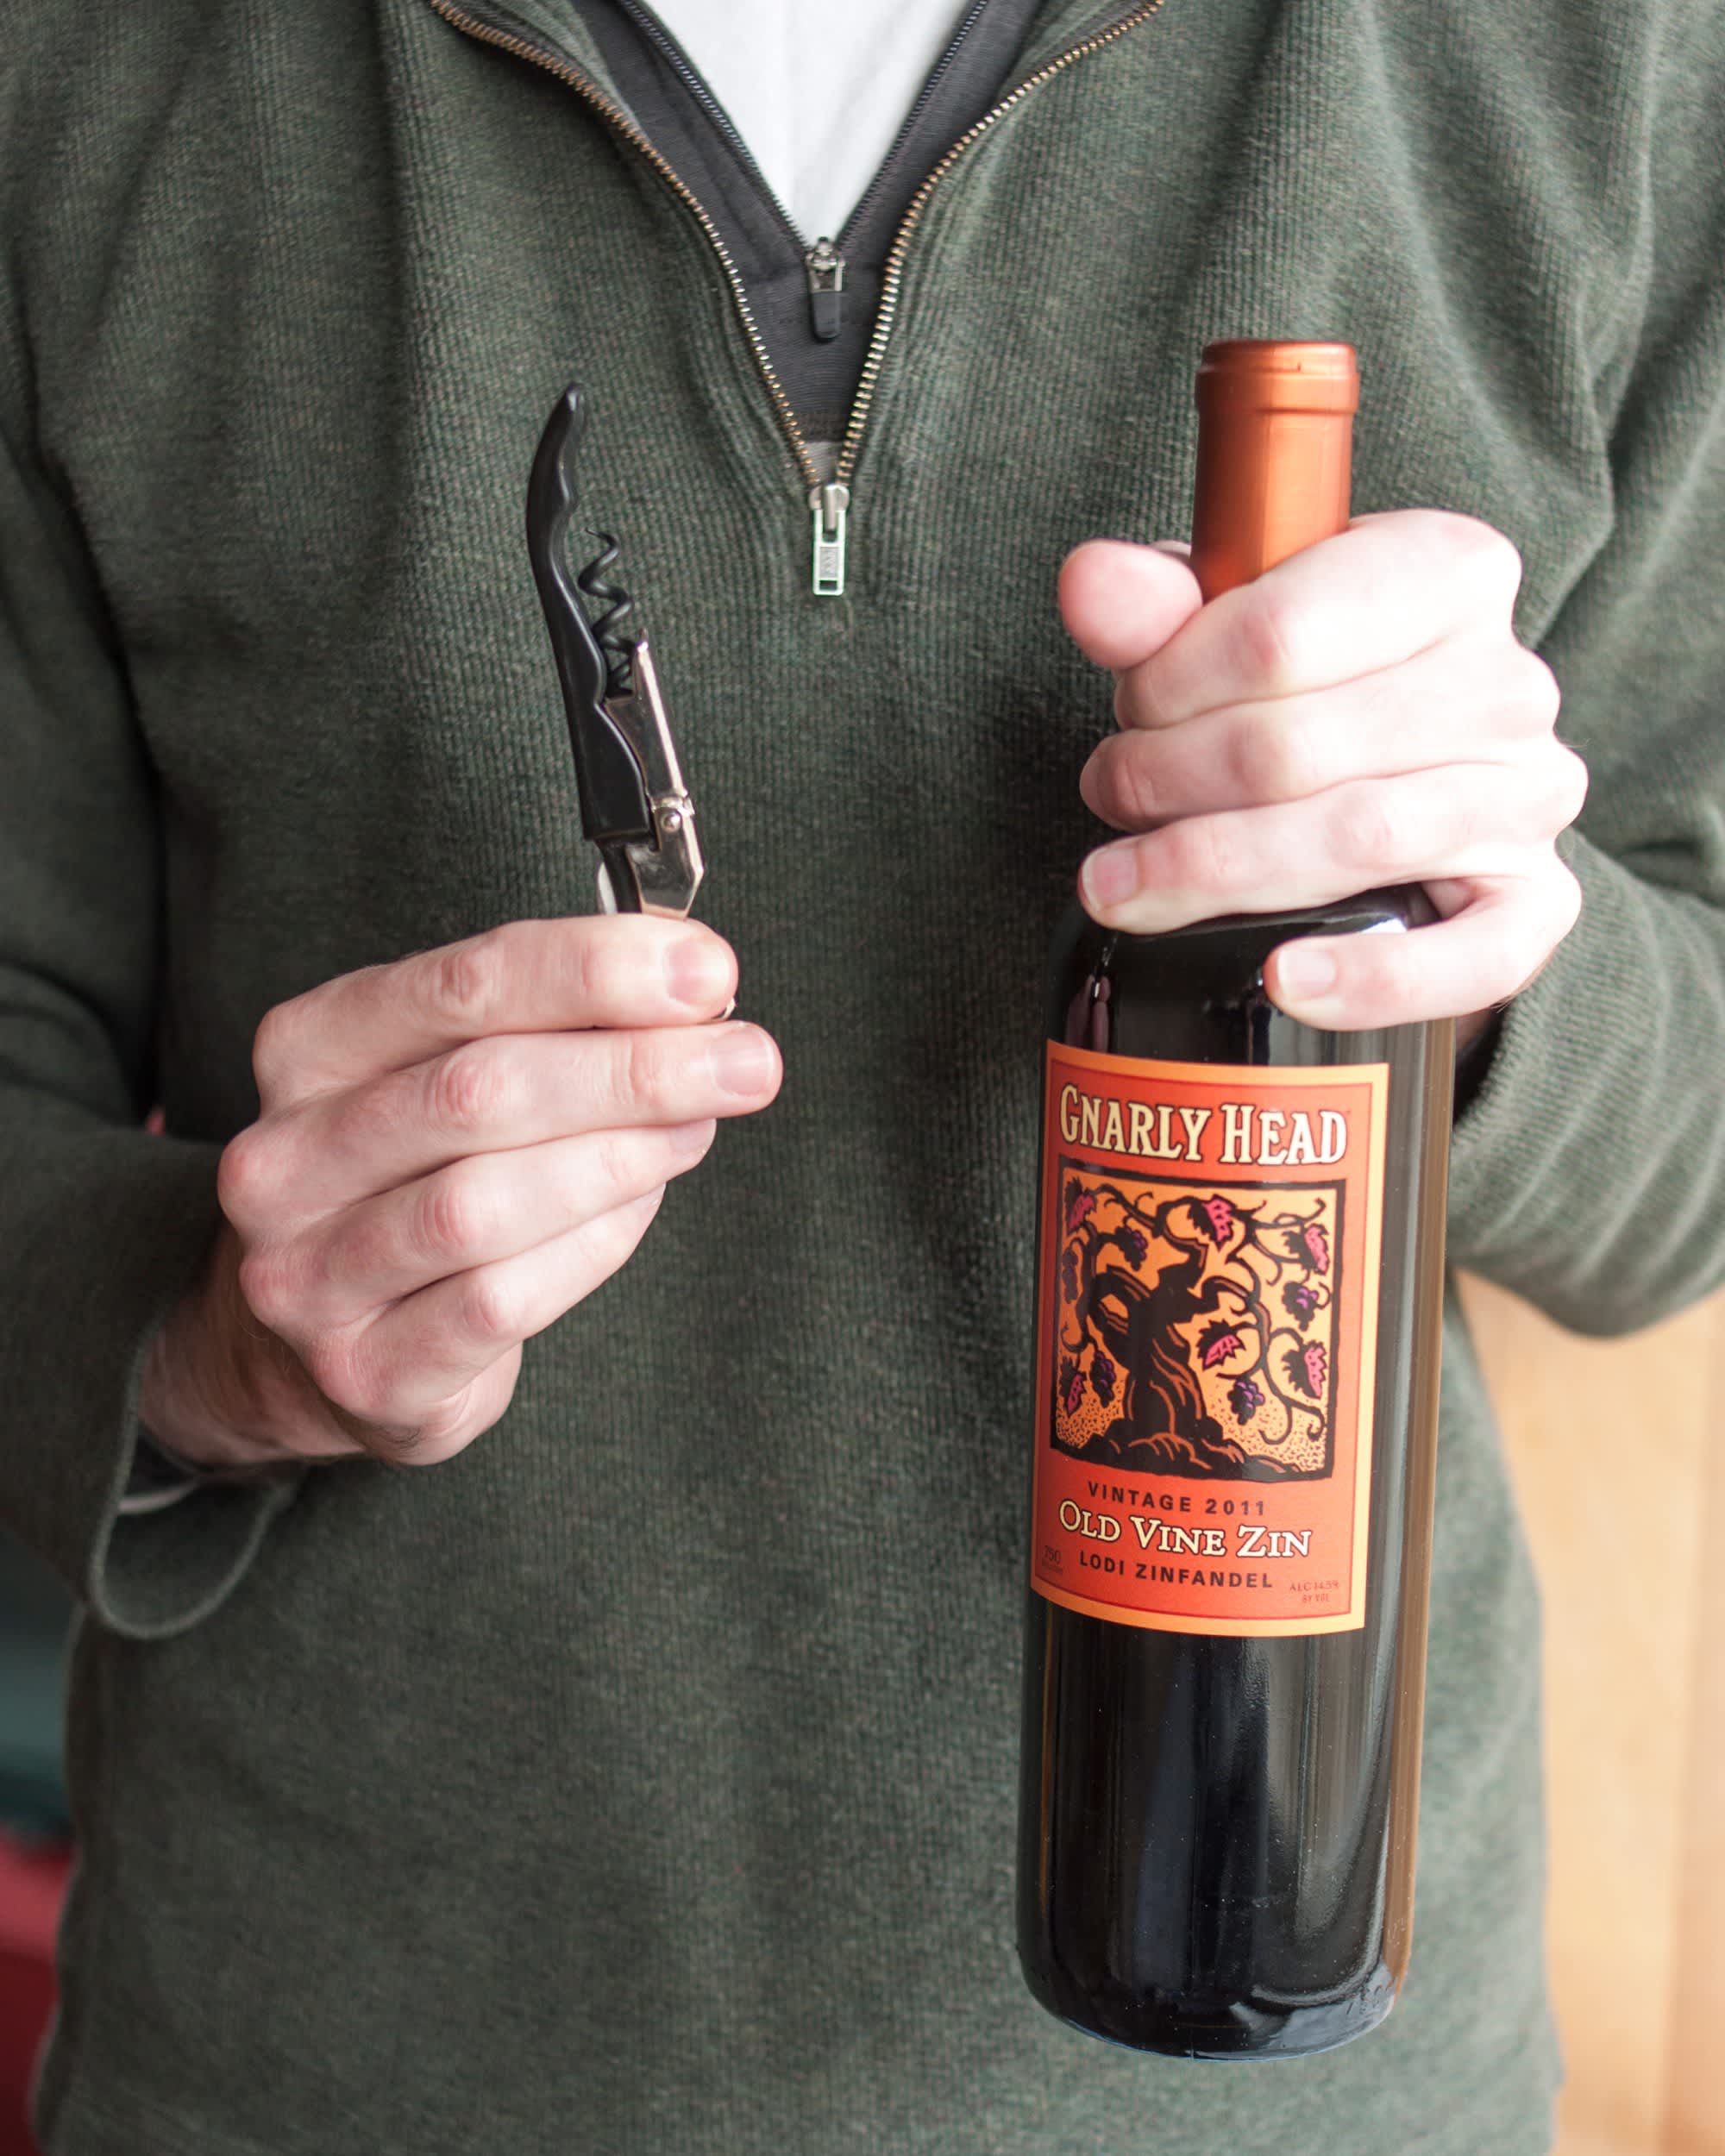 How To Open a Bottle of Wine Using a Wine Key Corkscrew | Kitchn